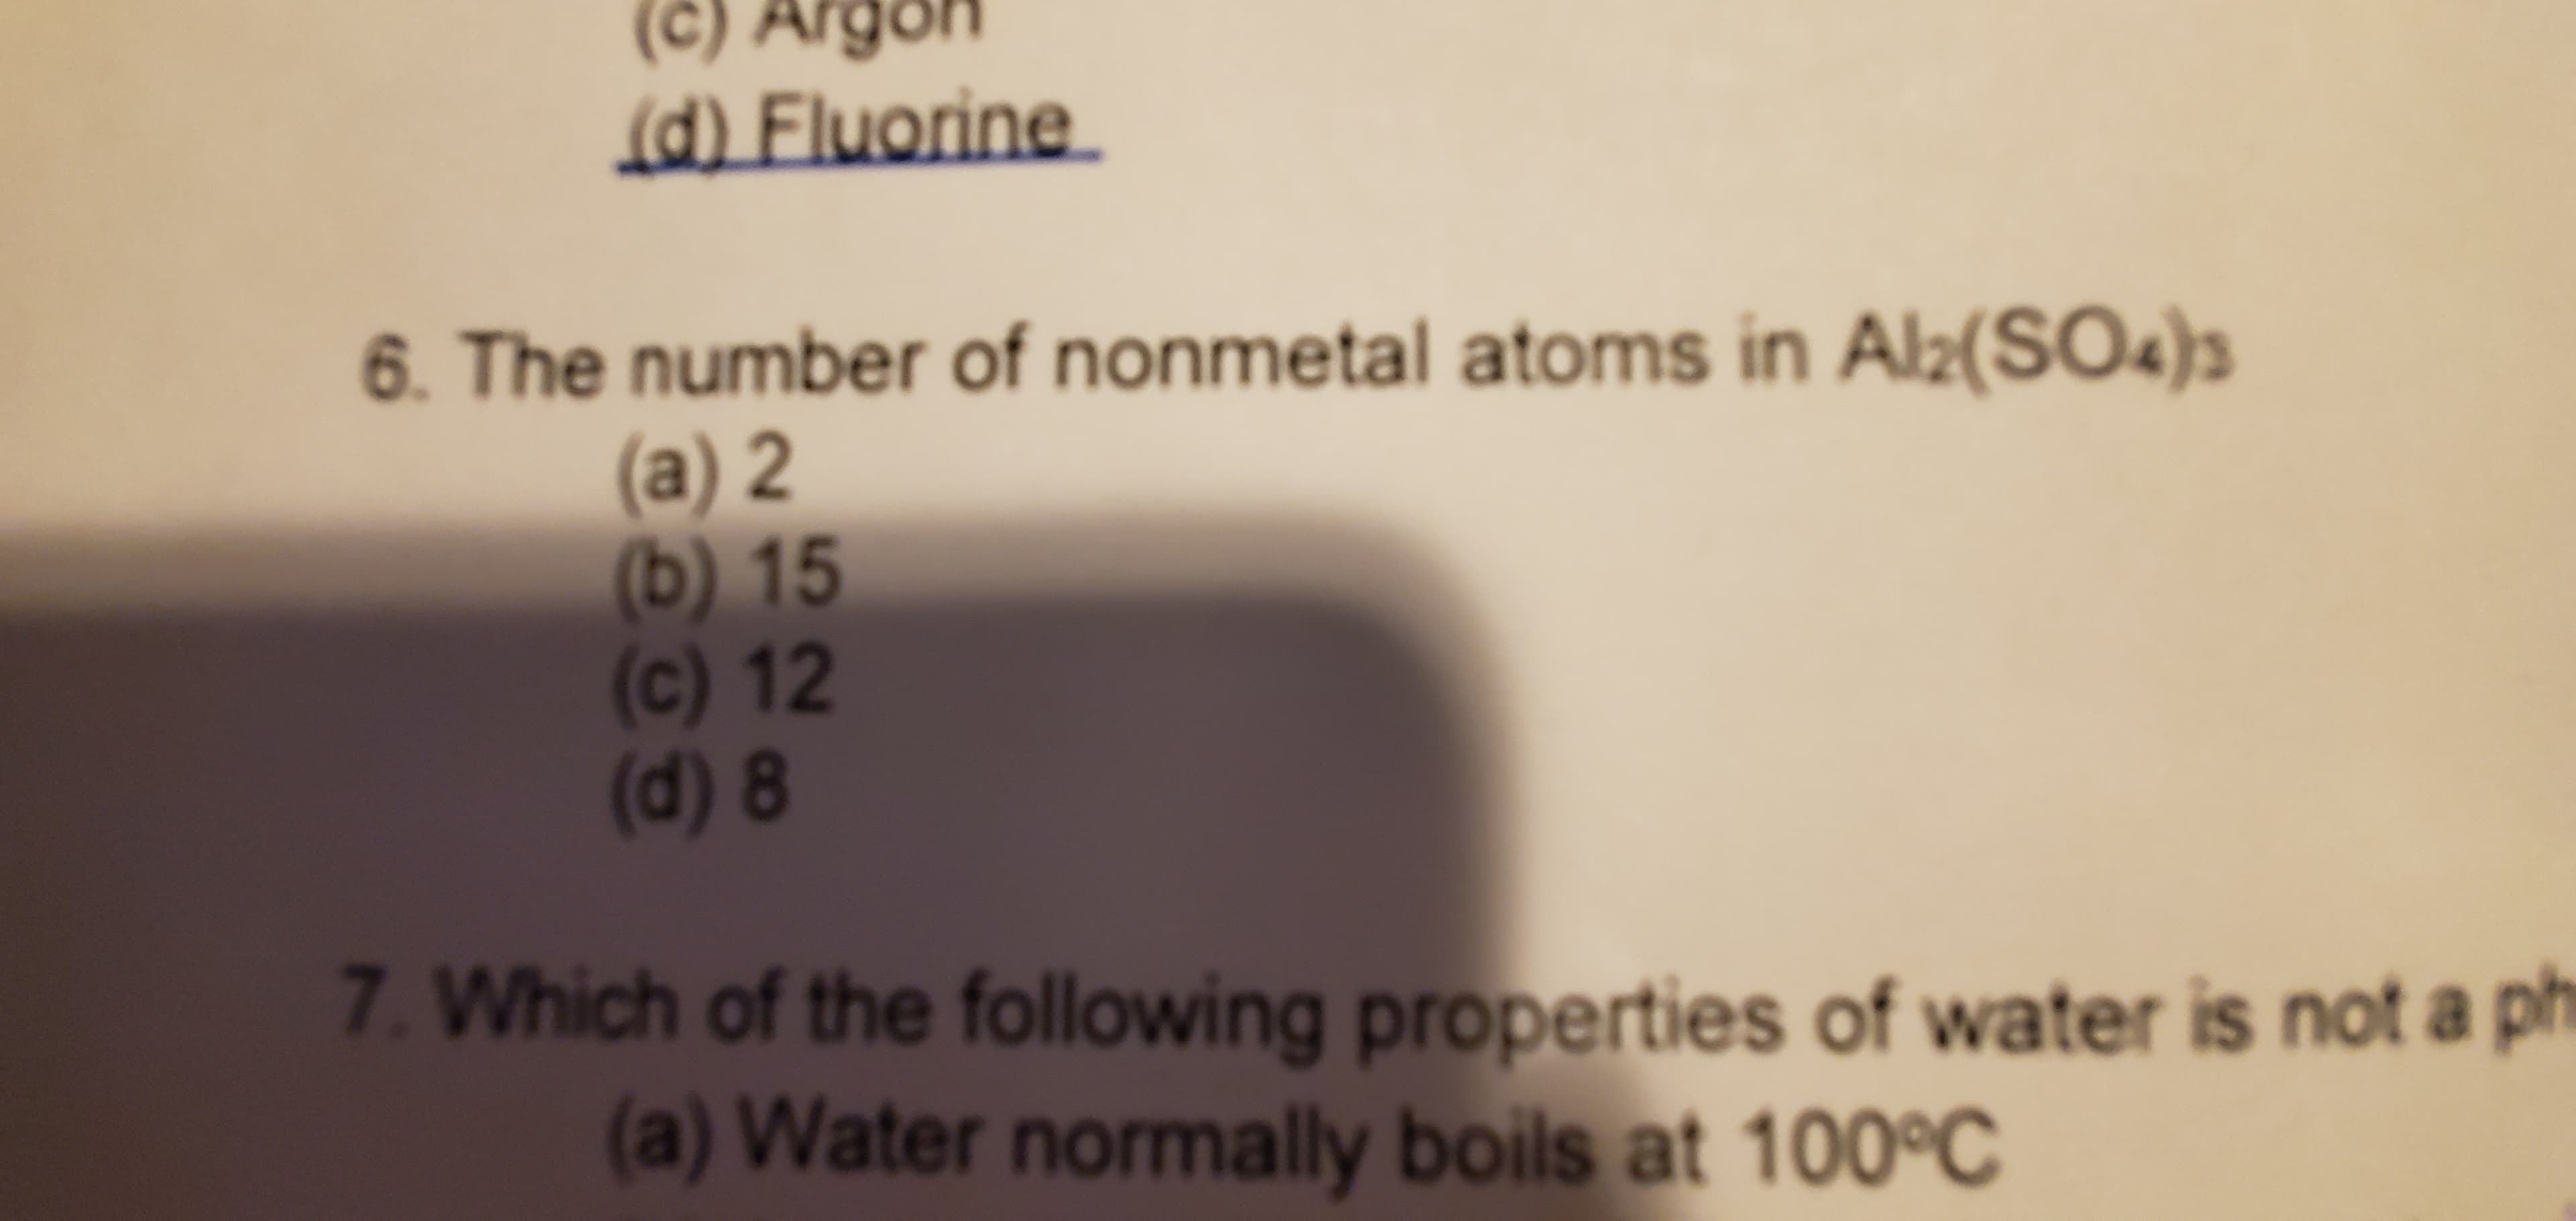 (c) Argon
d) Fluorine
6. The number of nonmetal atoms in Al2(SO4)3
(a) 2
15
(b)
(c) 12
(d) 8
7. Which of the following properties of water is not a
(a) Water normally boils at 100°C
